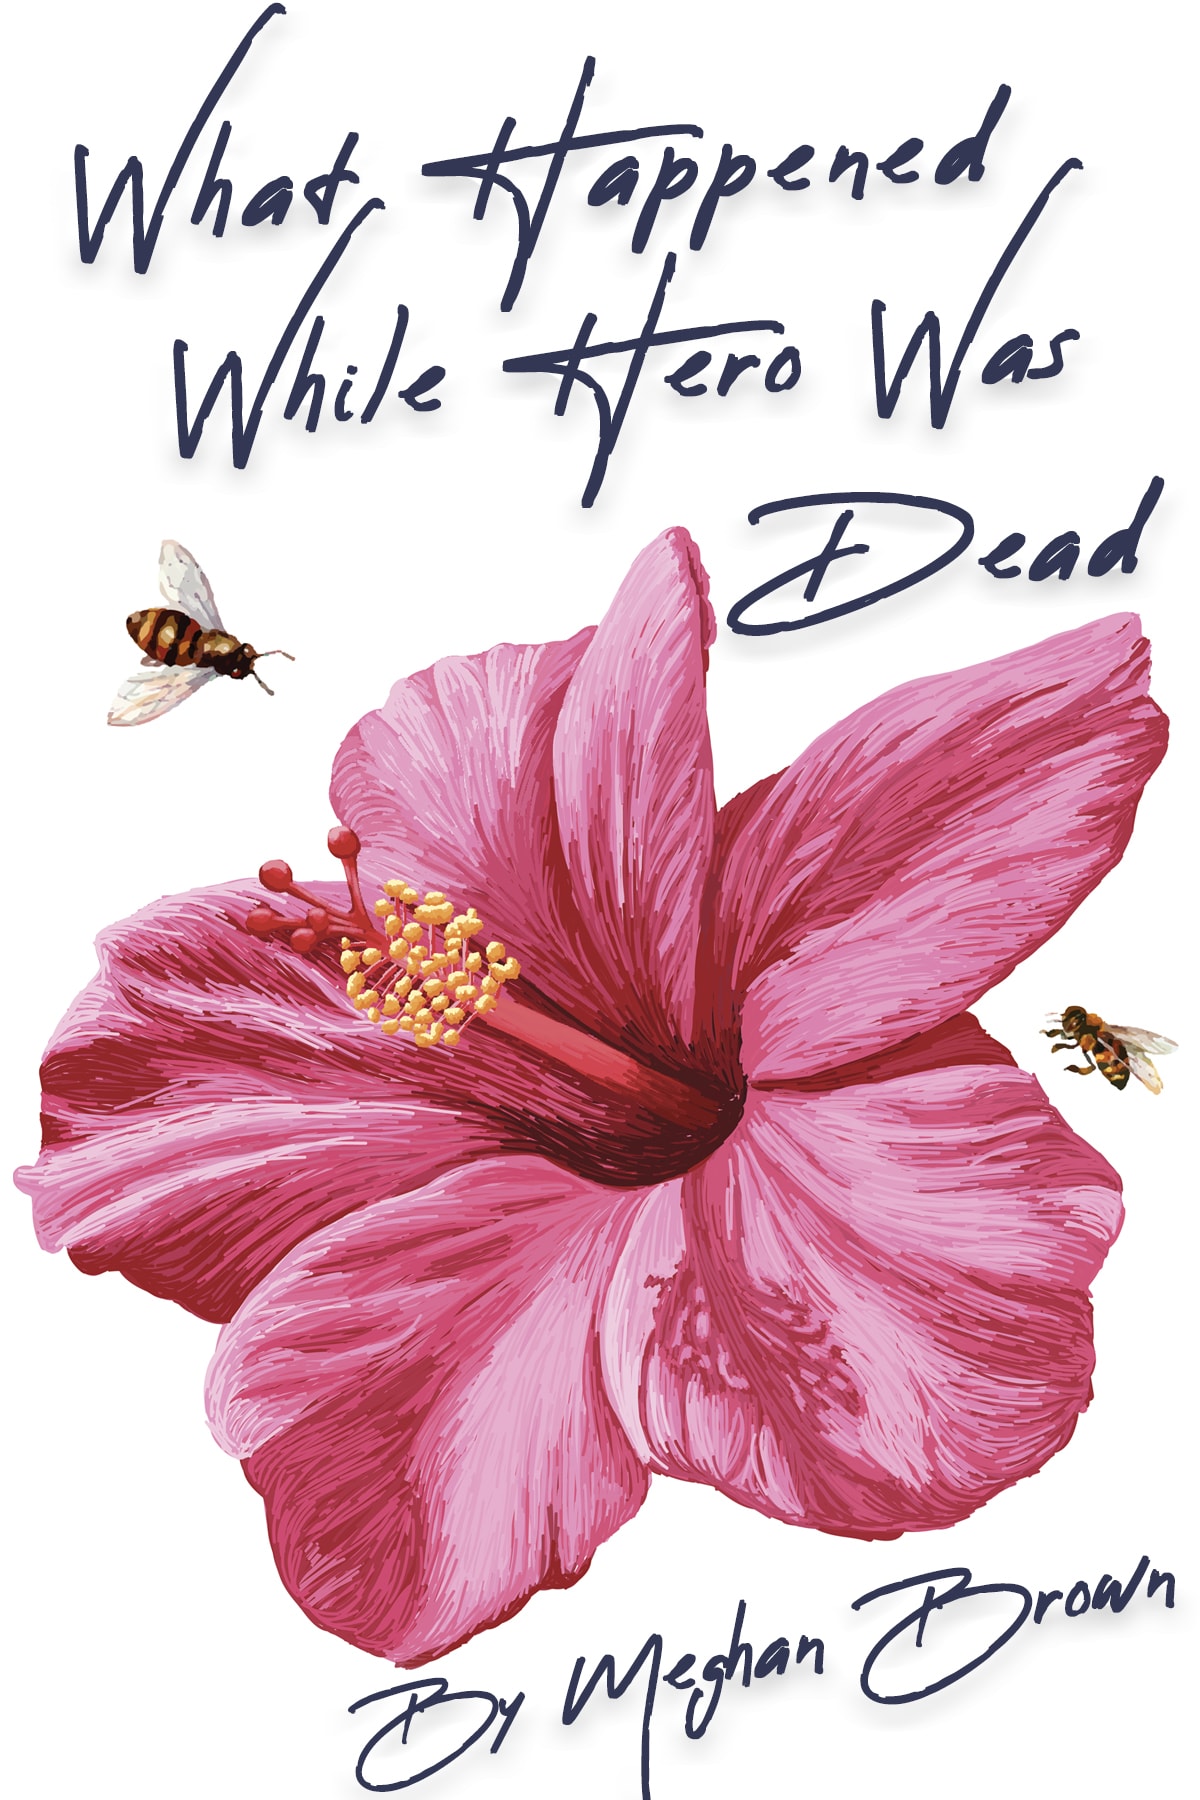 What Happened While Hero Was Dead by Meghan Brown Ashland New Plays Festival 2021